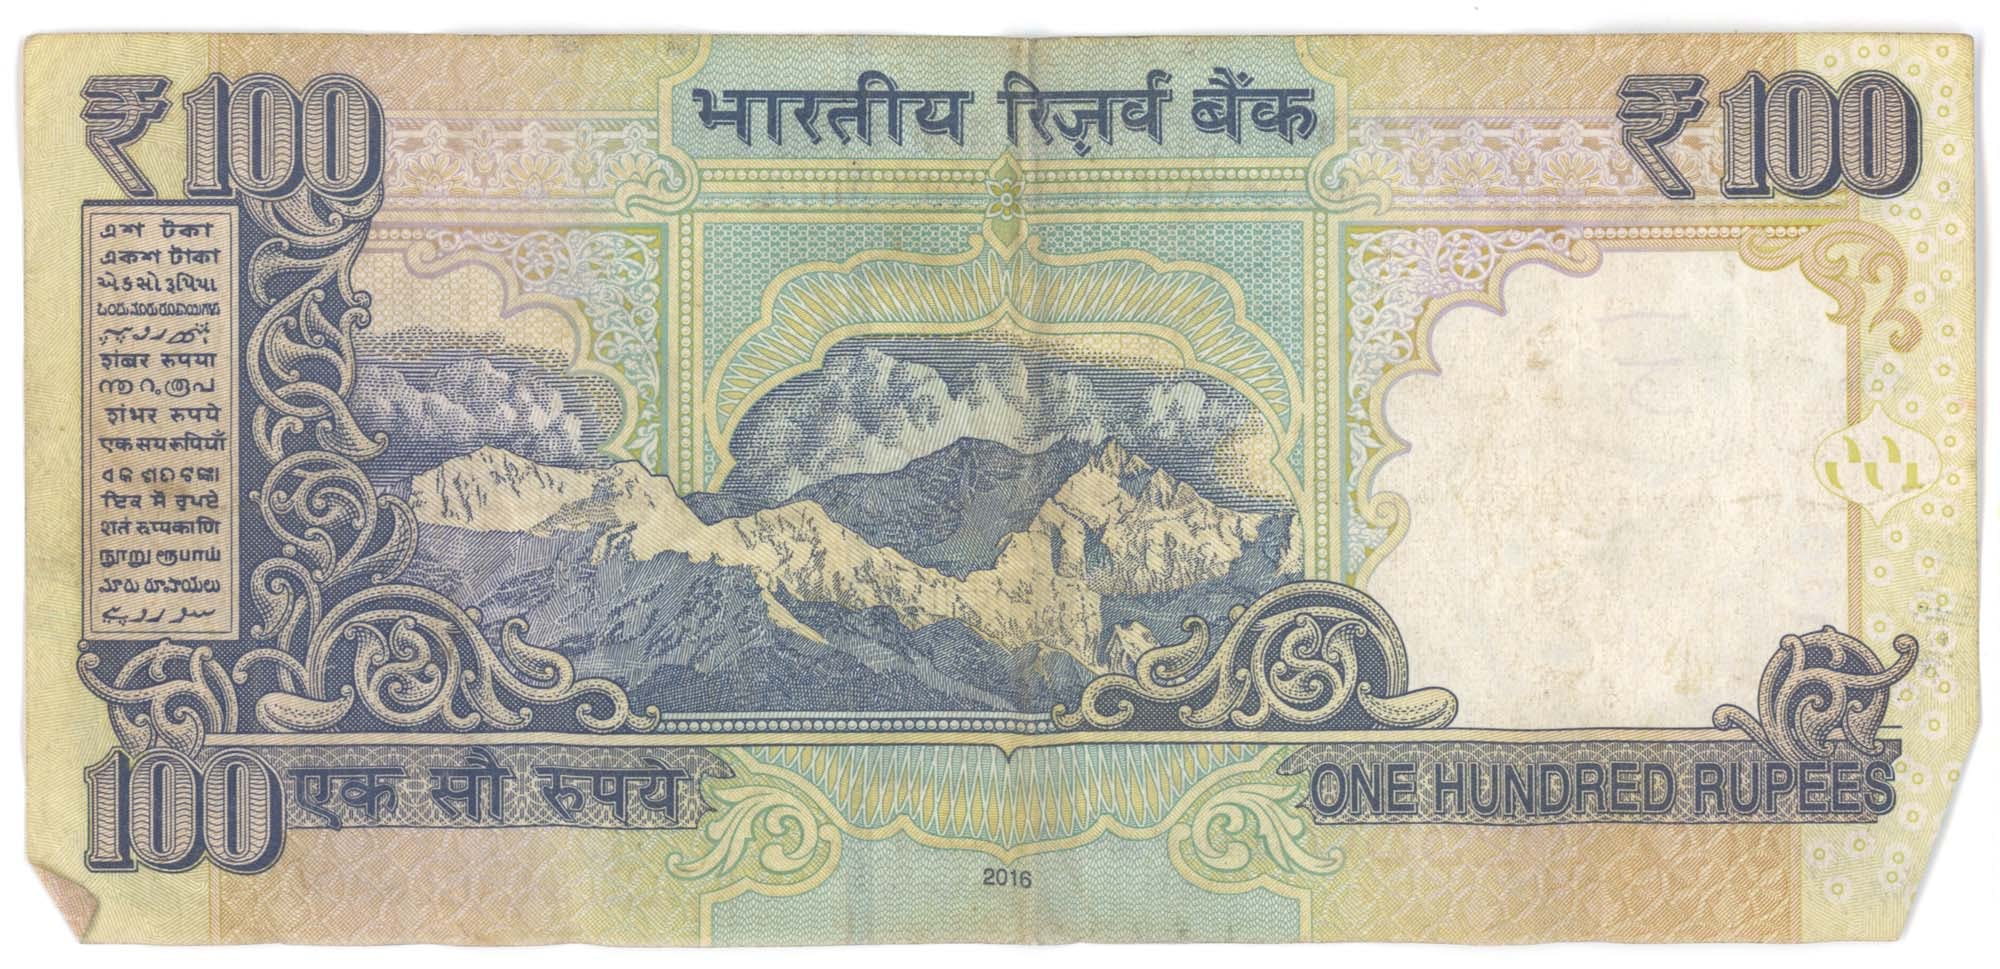 100 Indian rupees